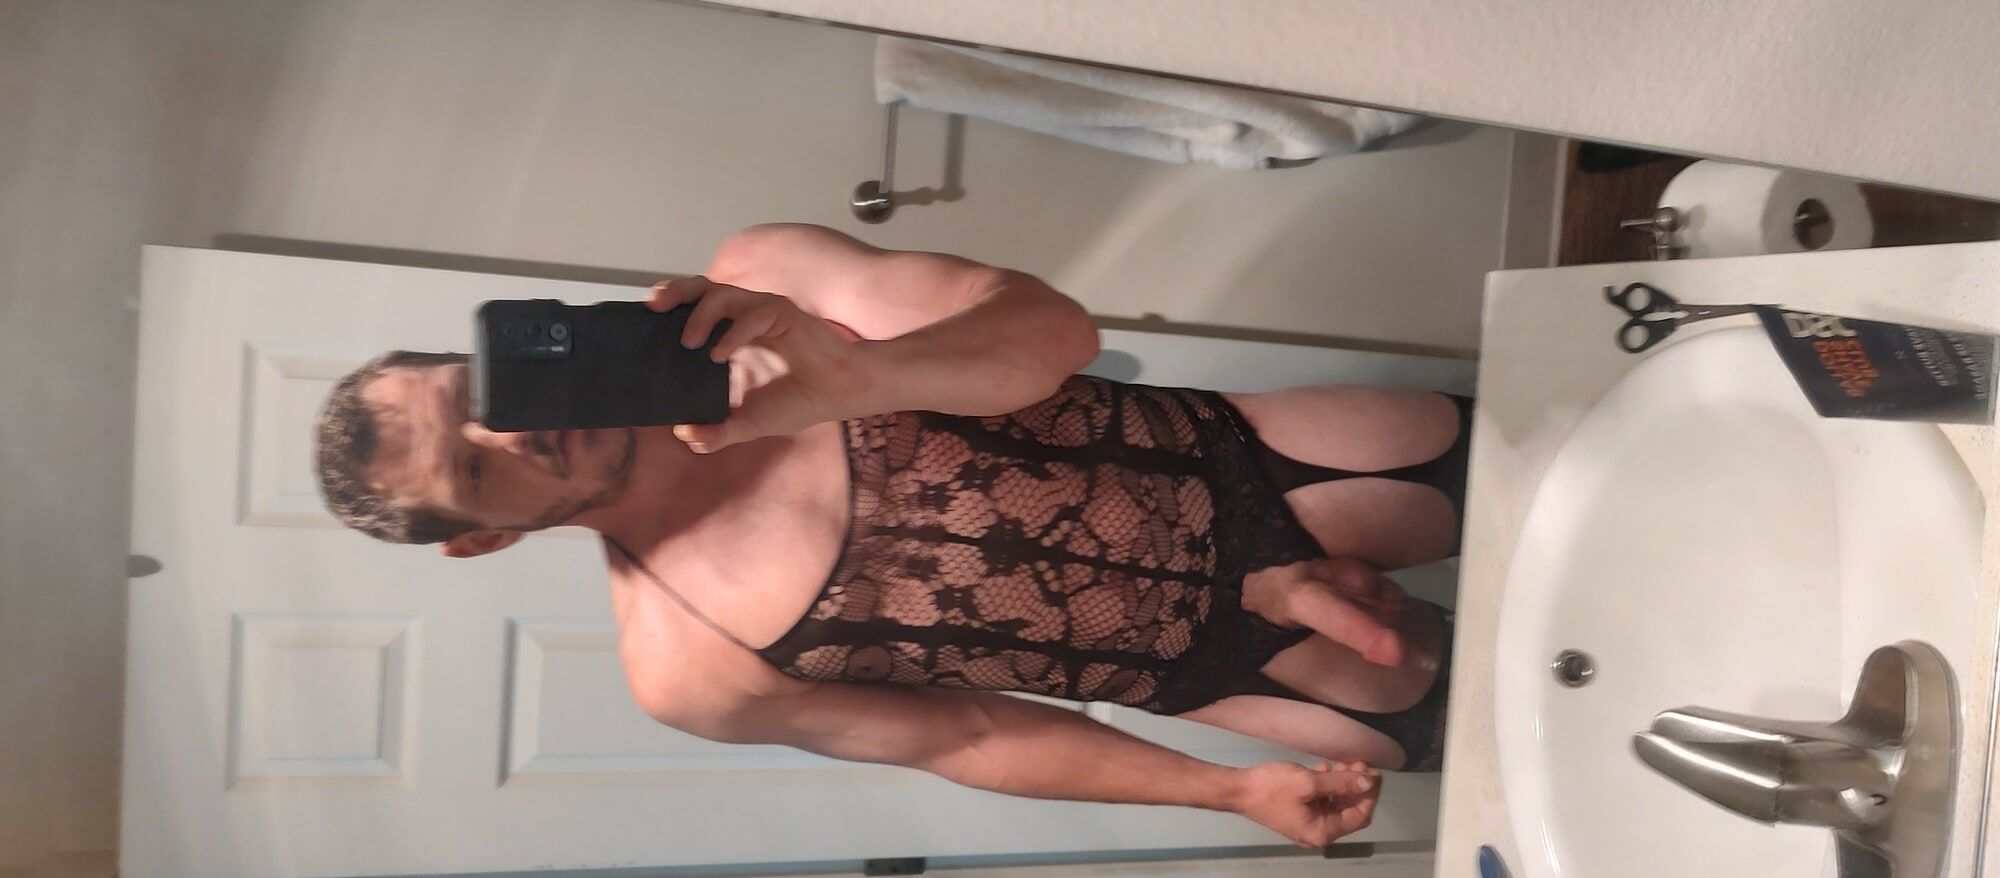 Me in sexy lengerie #3